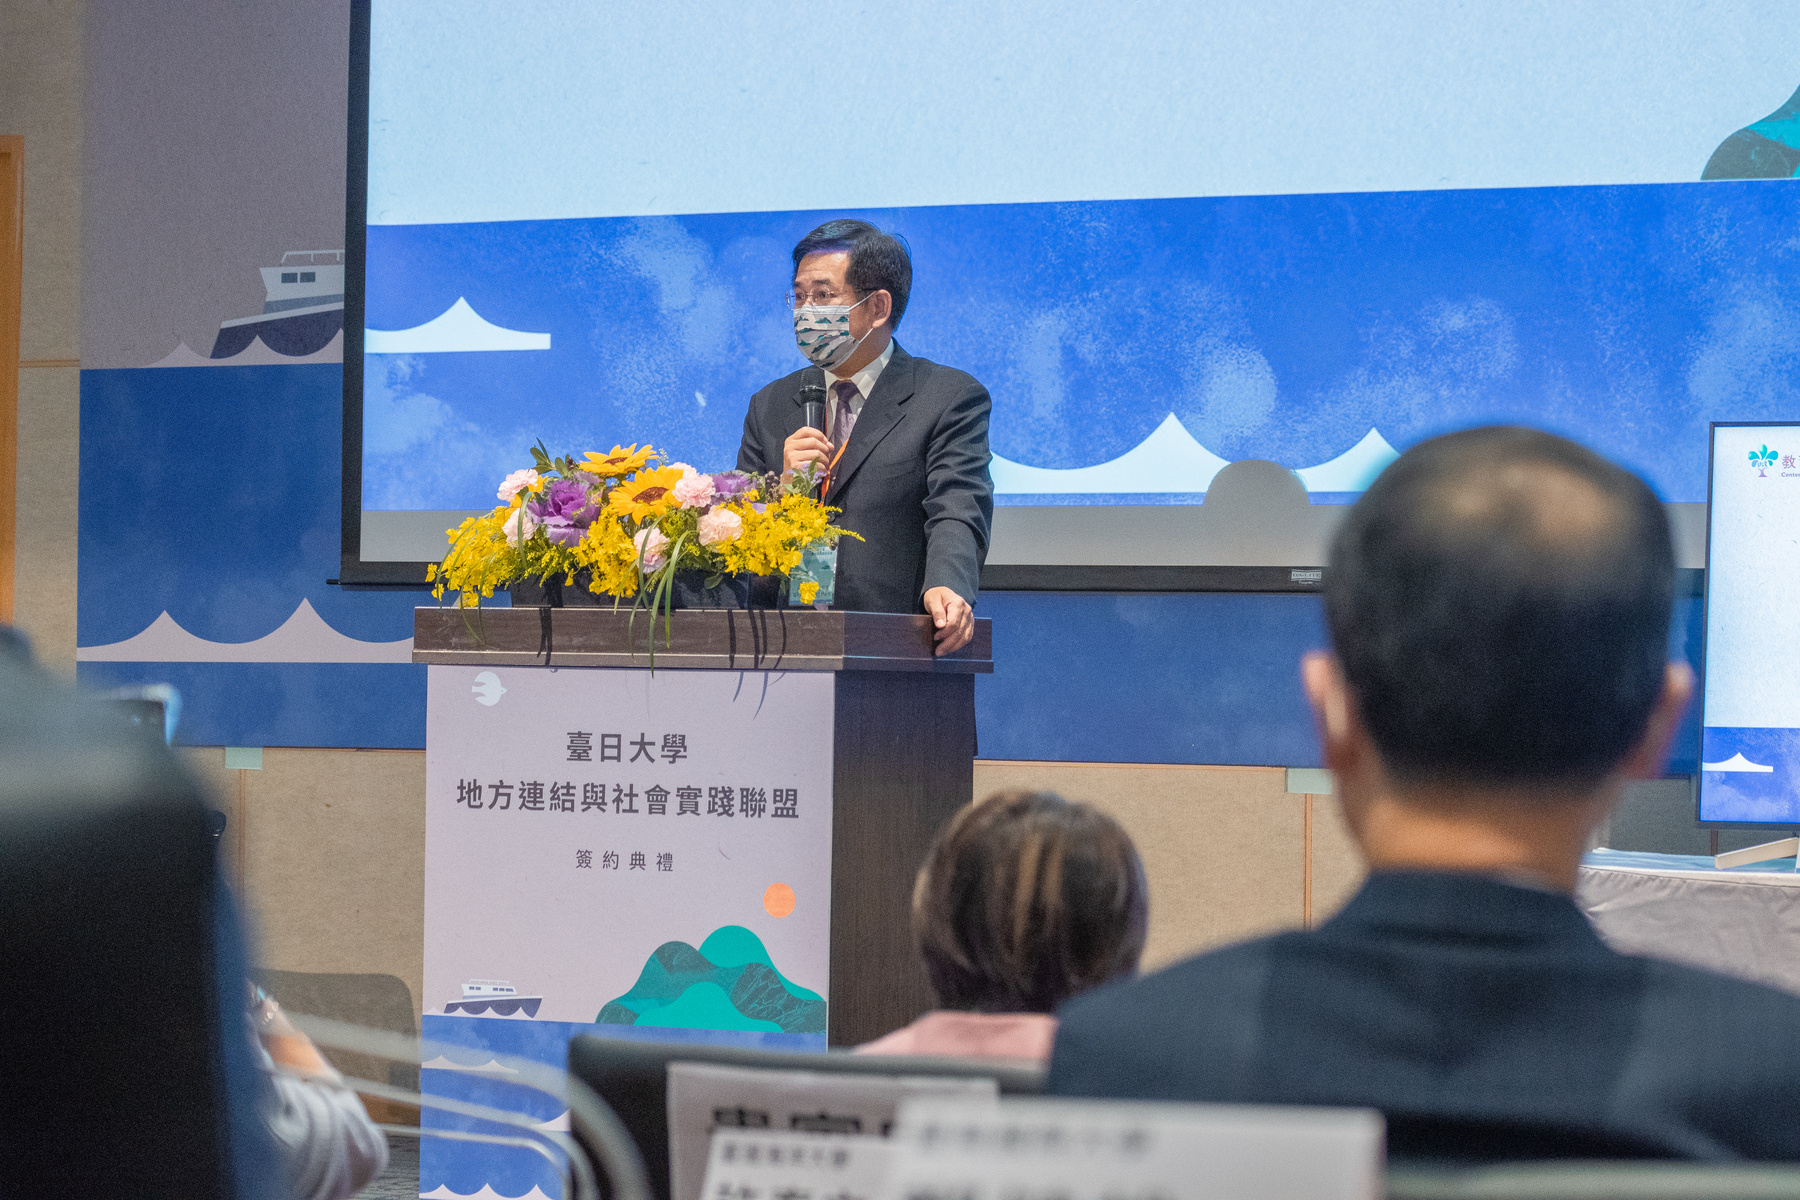 Minister of Education Wen-Chung Pan gave a speech during the opening ceremony.